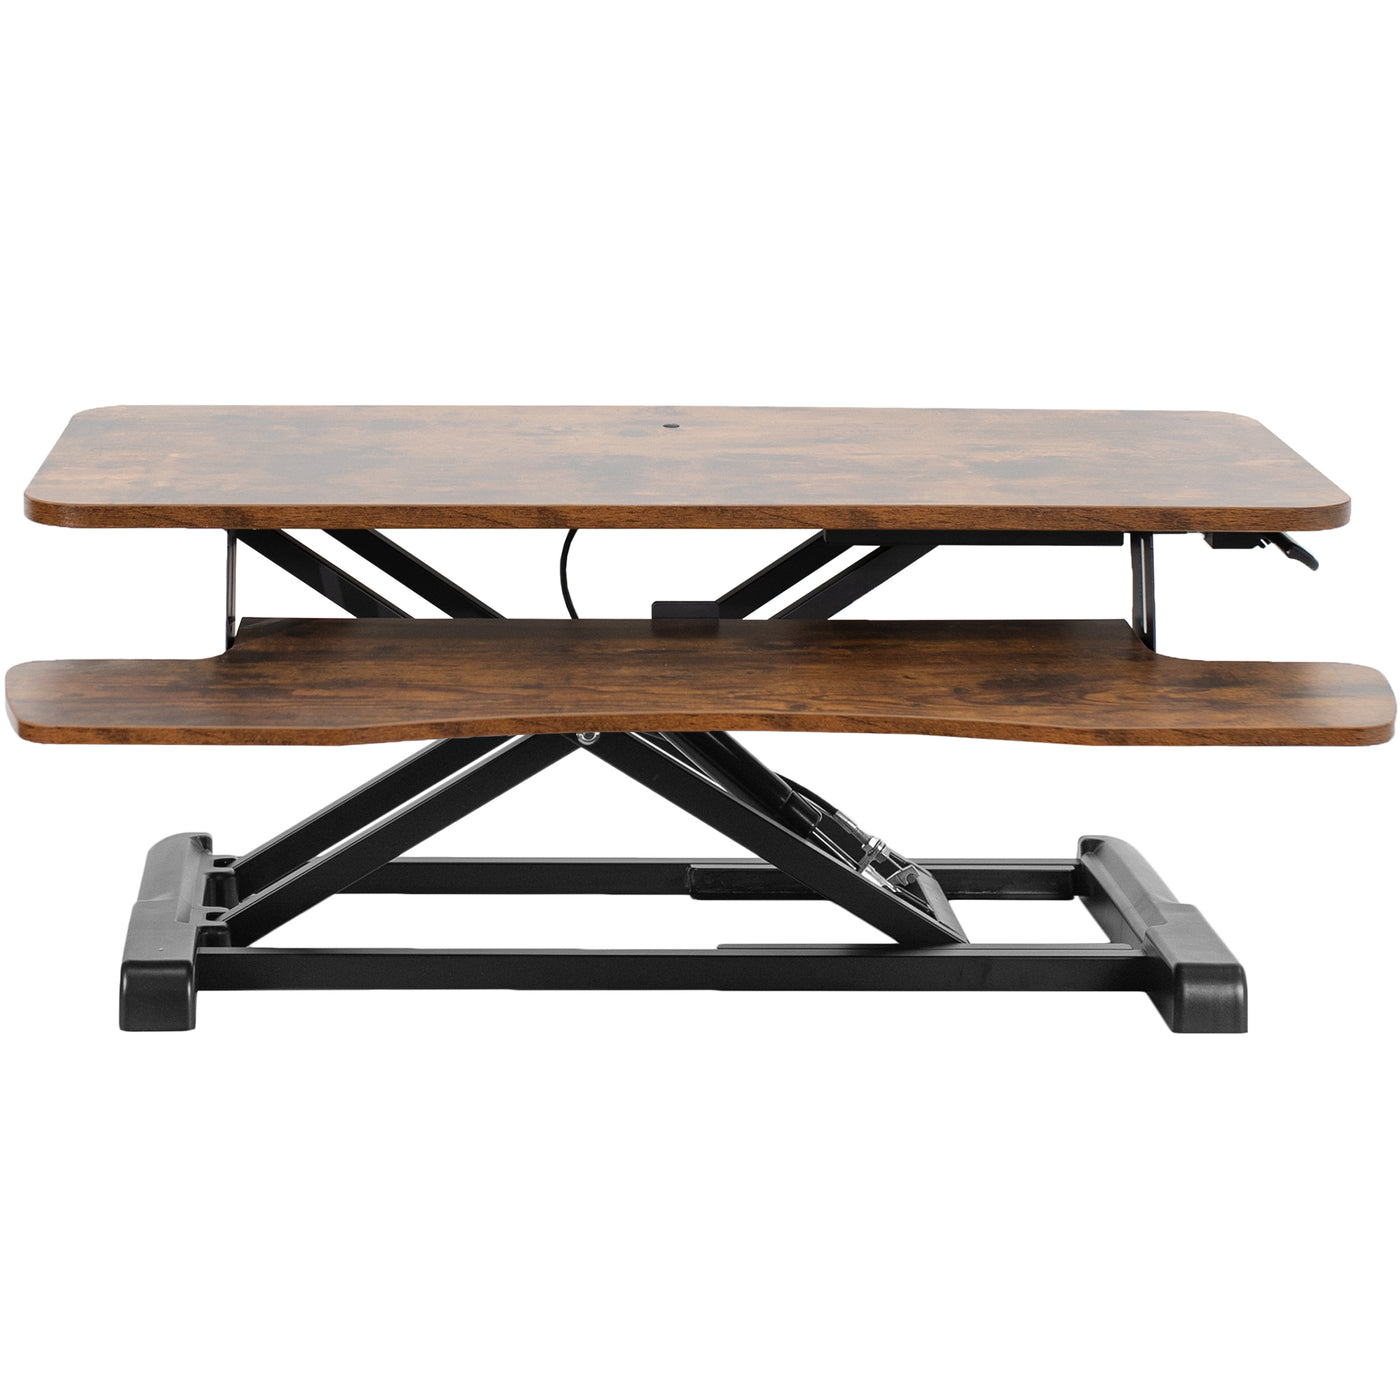 Rustic adjustable sit-to-stand table-top desk riser. 